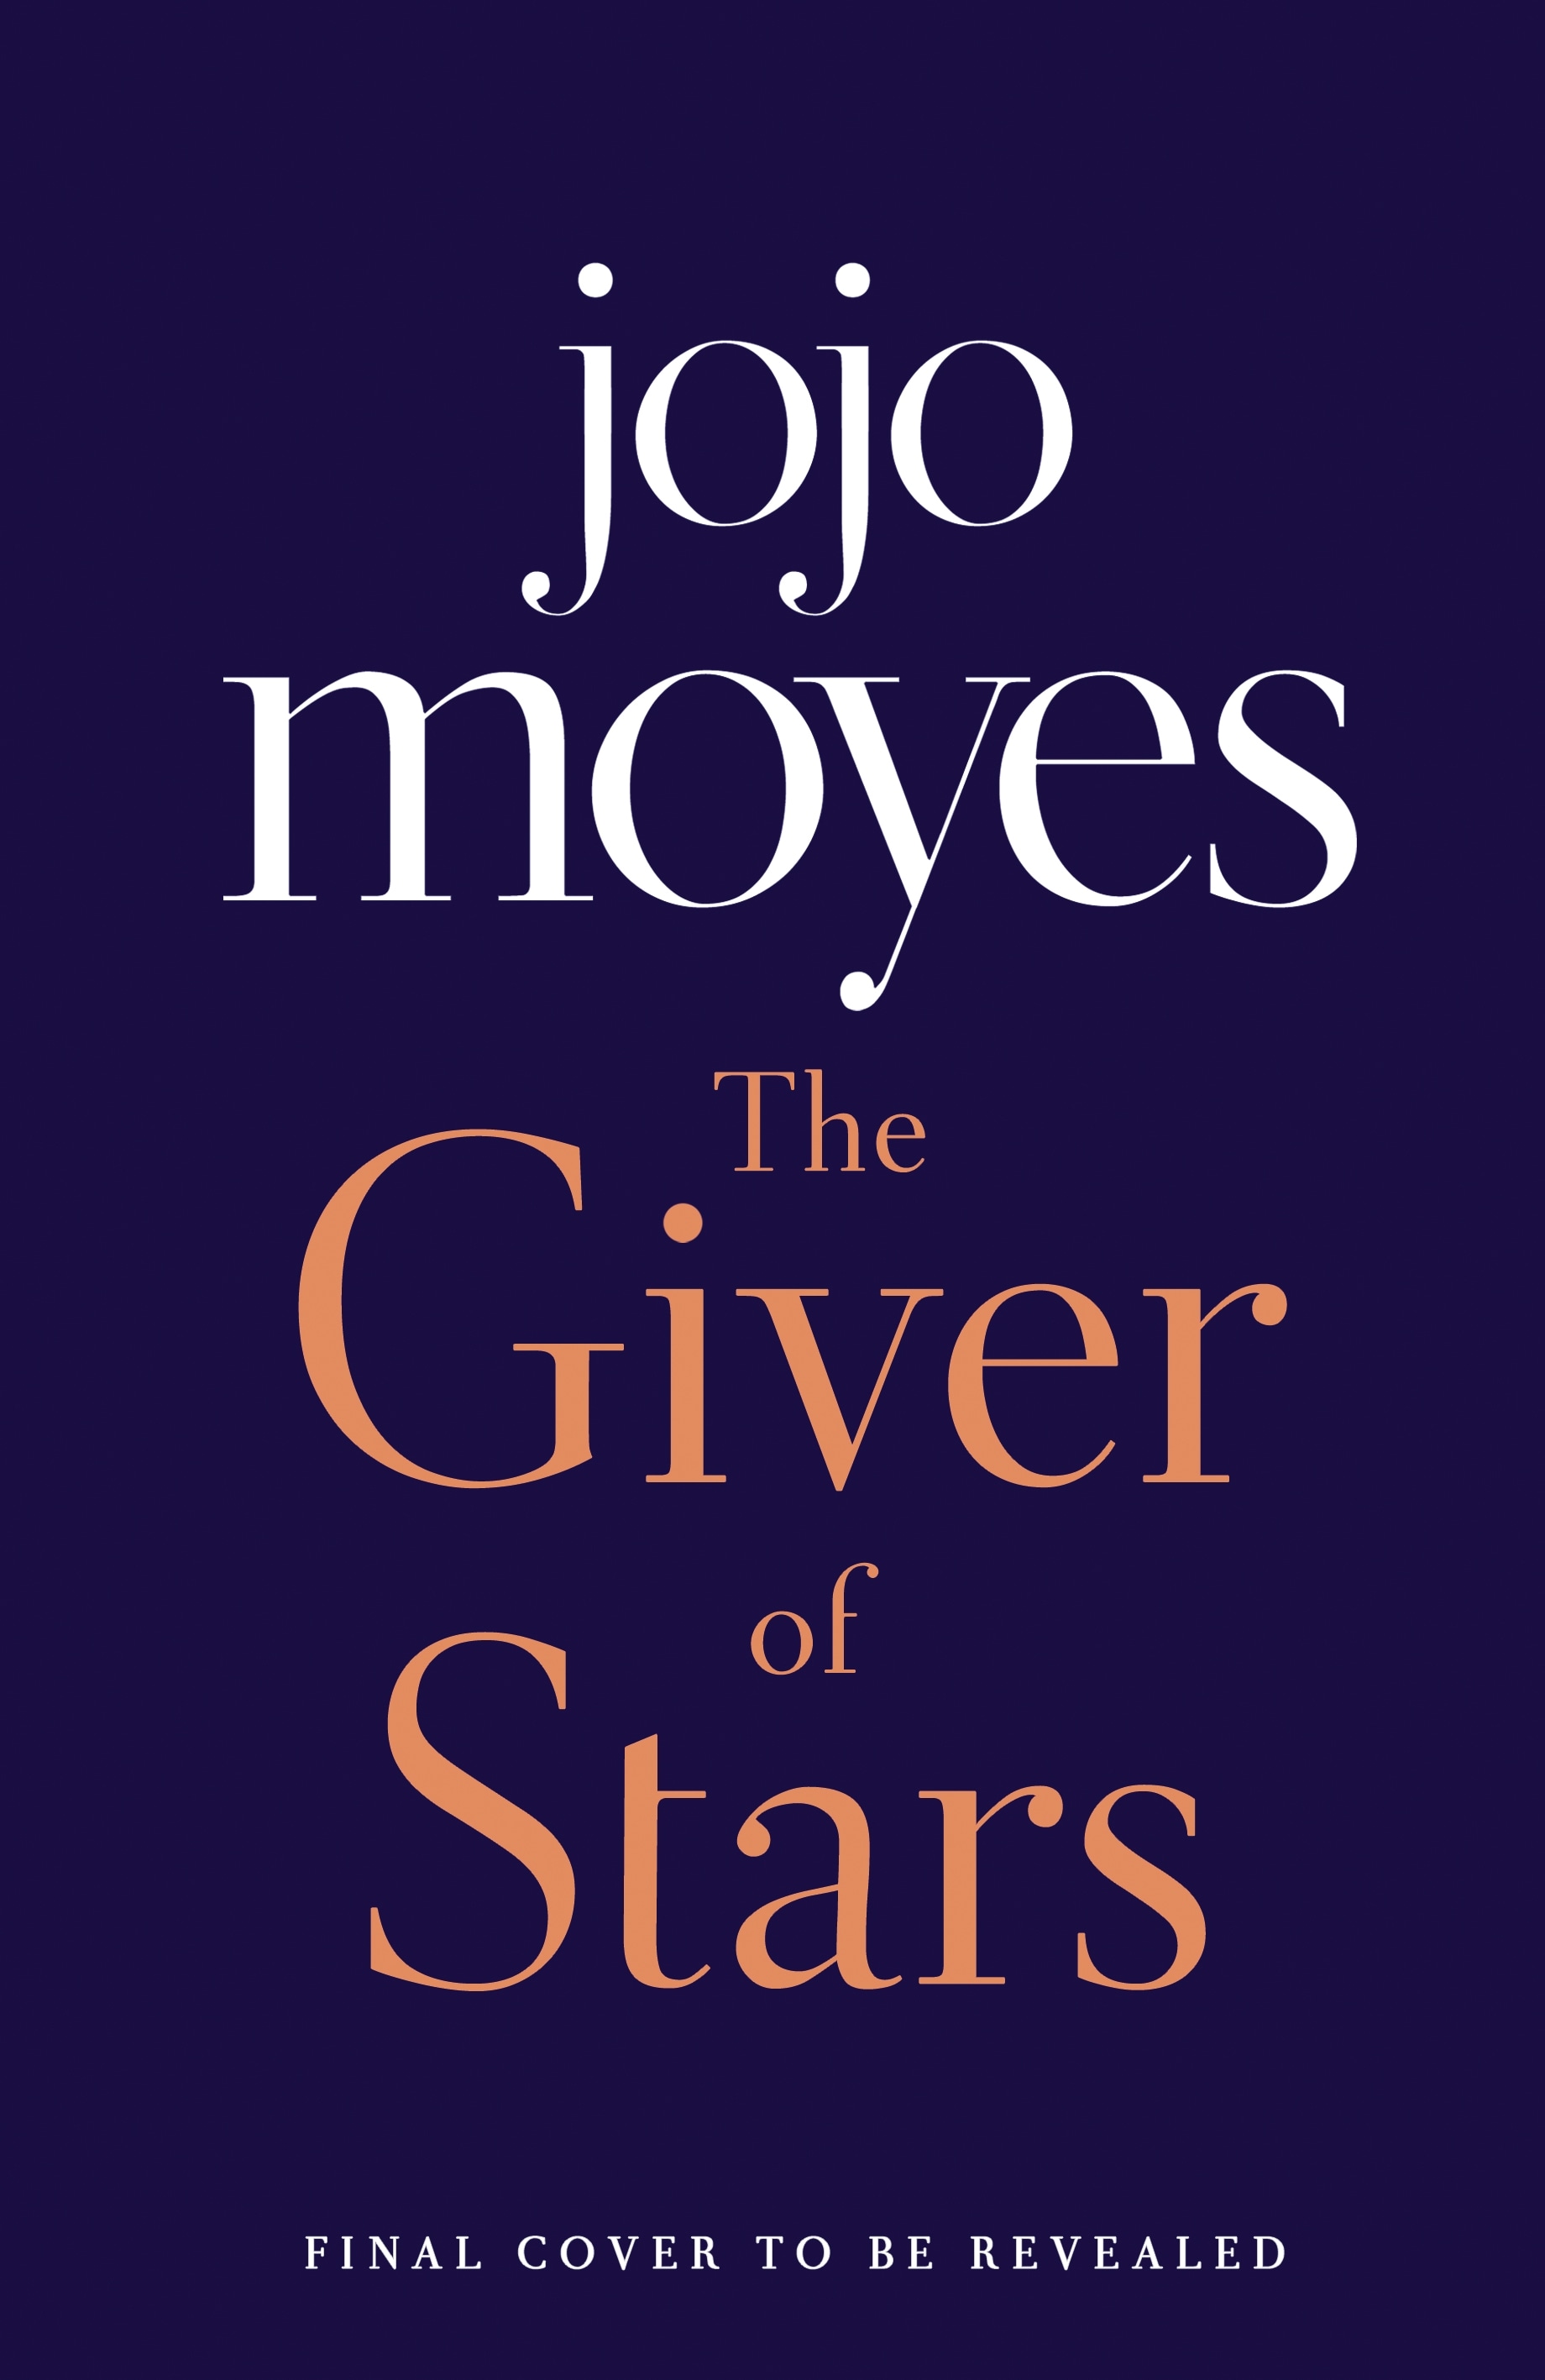 Book “The Giver of Stars” by Jojo Moyes — October 3, 2019